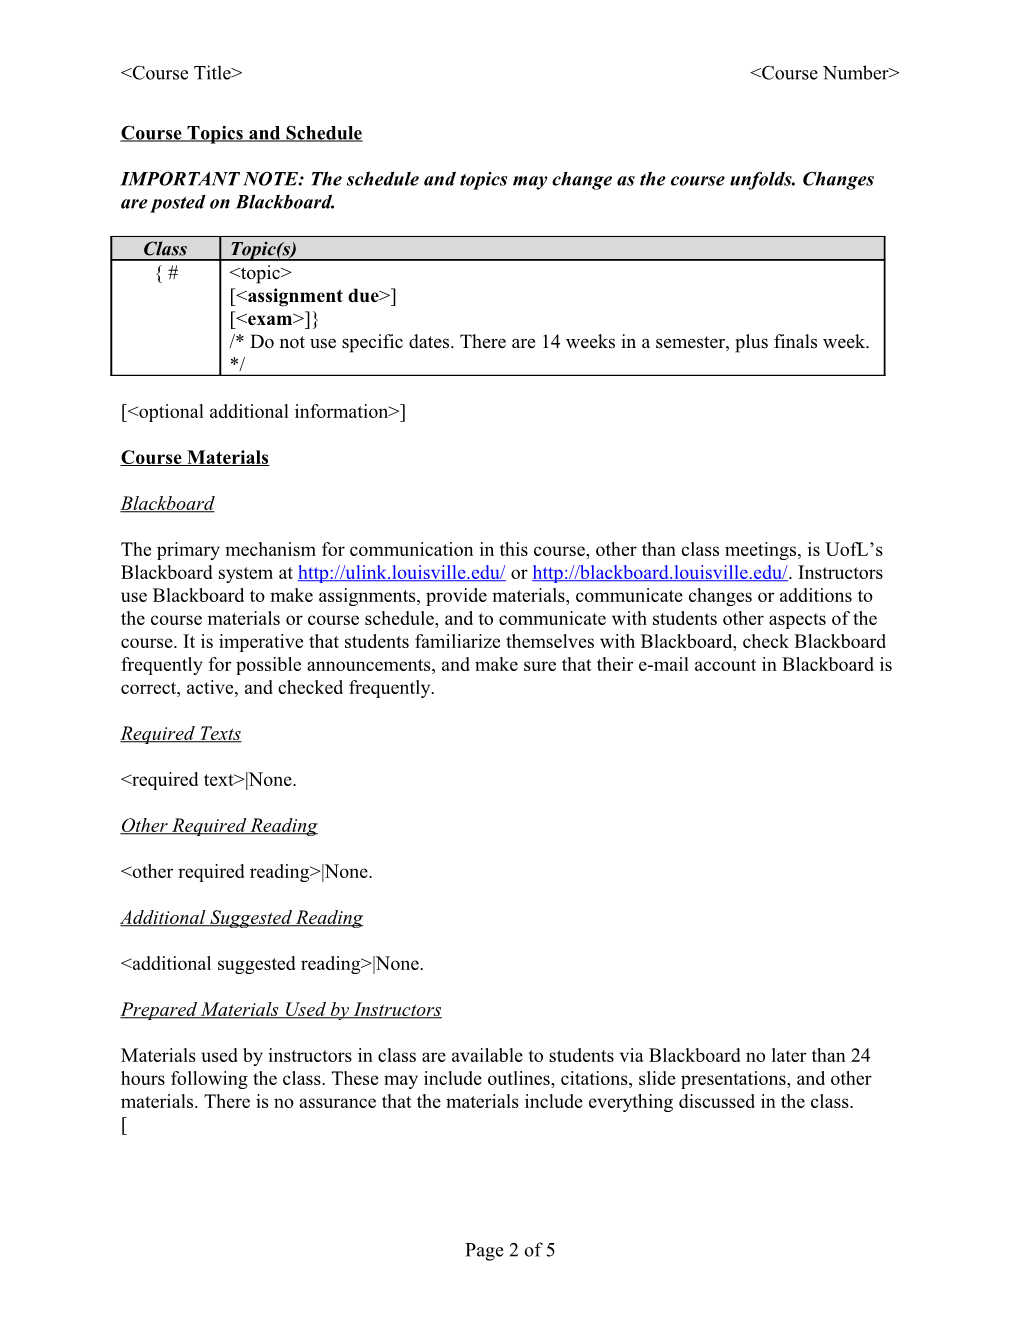 Course Syllabus (Approved) Template, Version 05